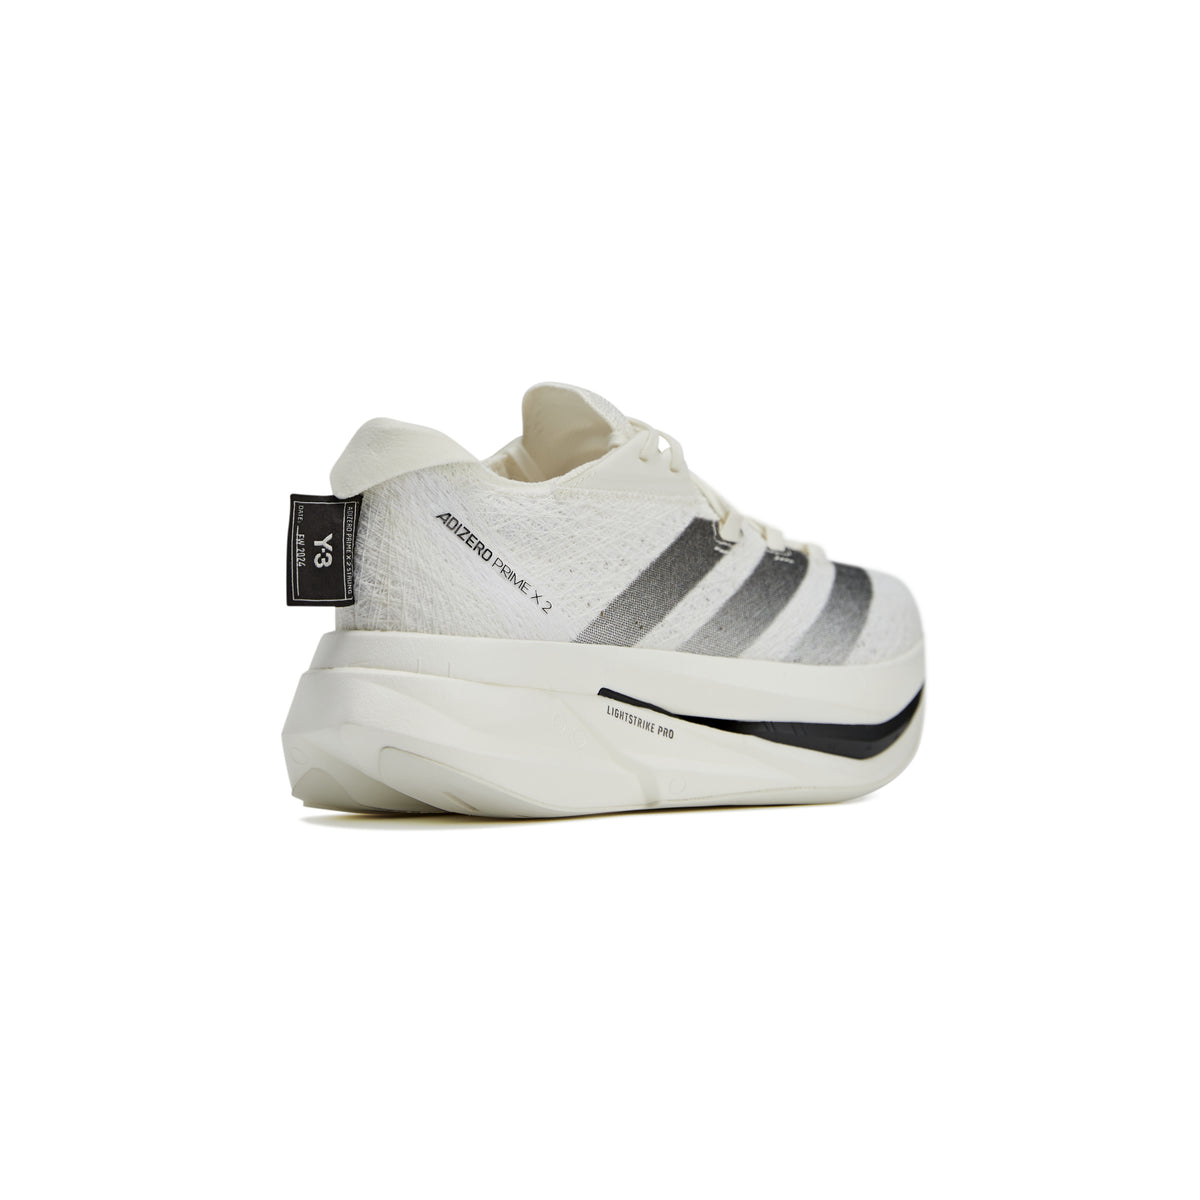 Y-3 Prime X2 Strung Sneakers - Off White / Core Black / Off White